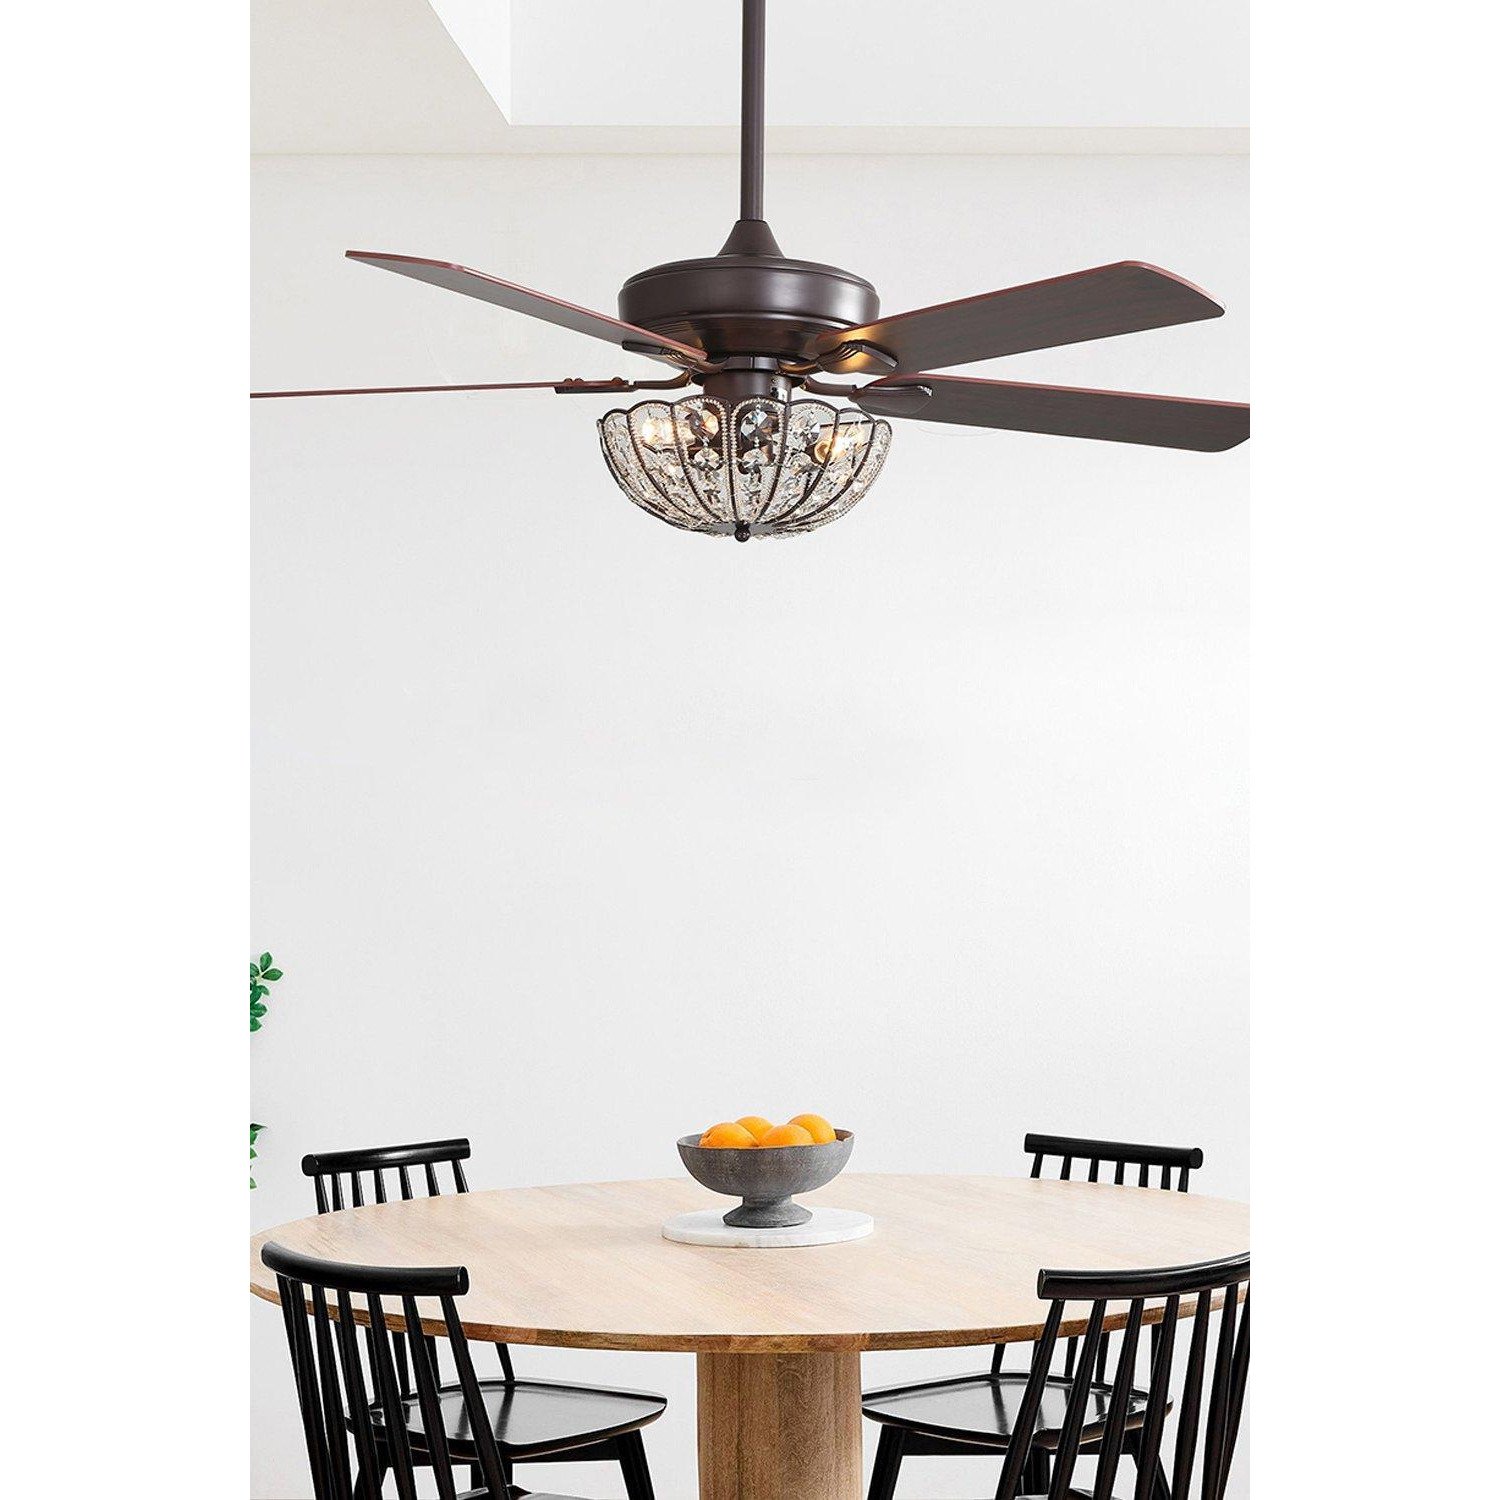 52-inch Coffee Ceiling Fan with Light and Remote - image 1